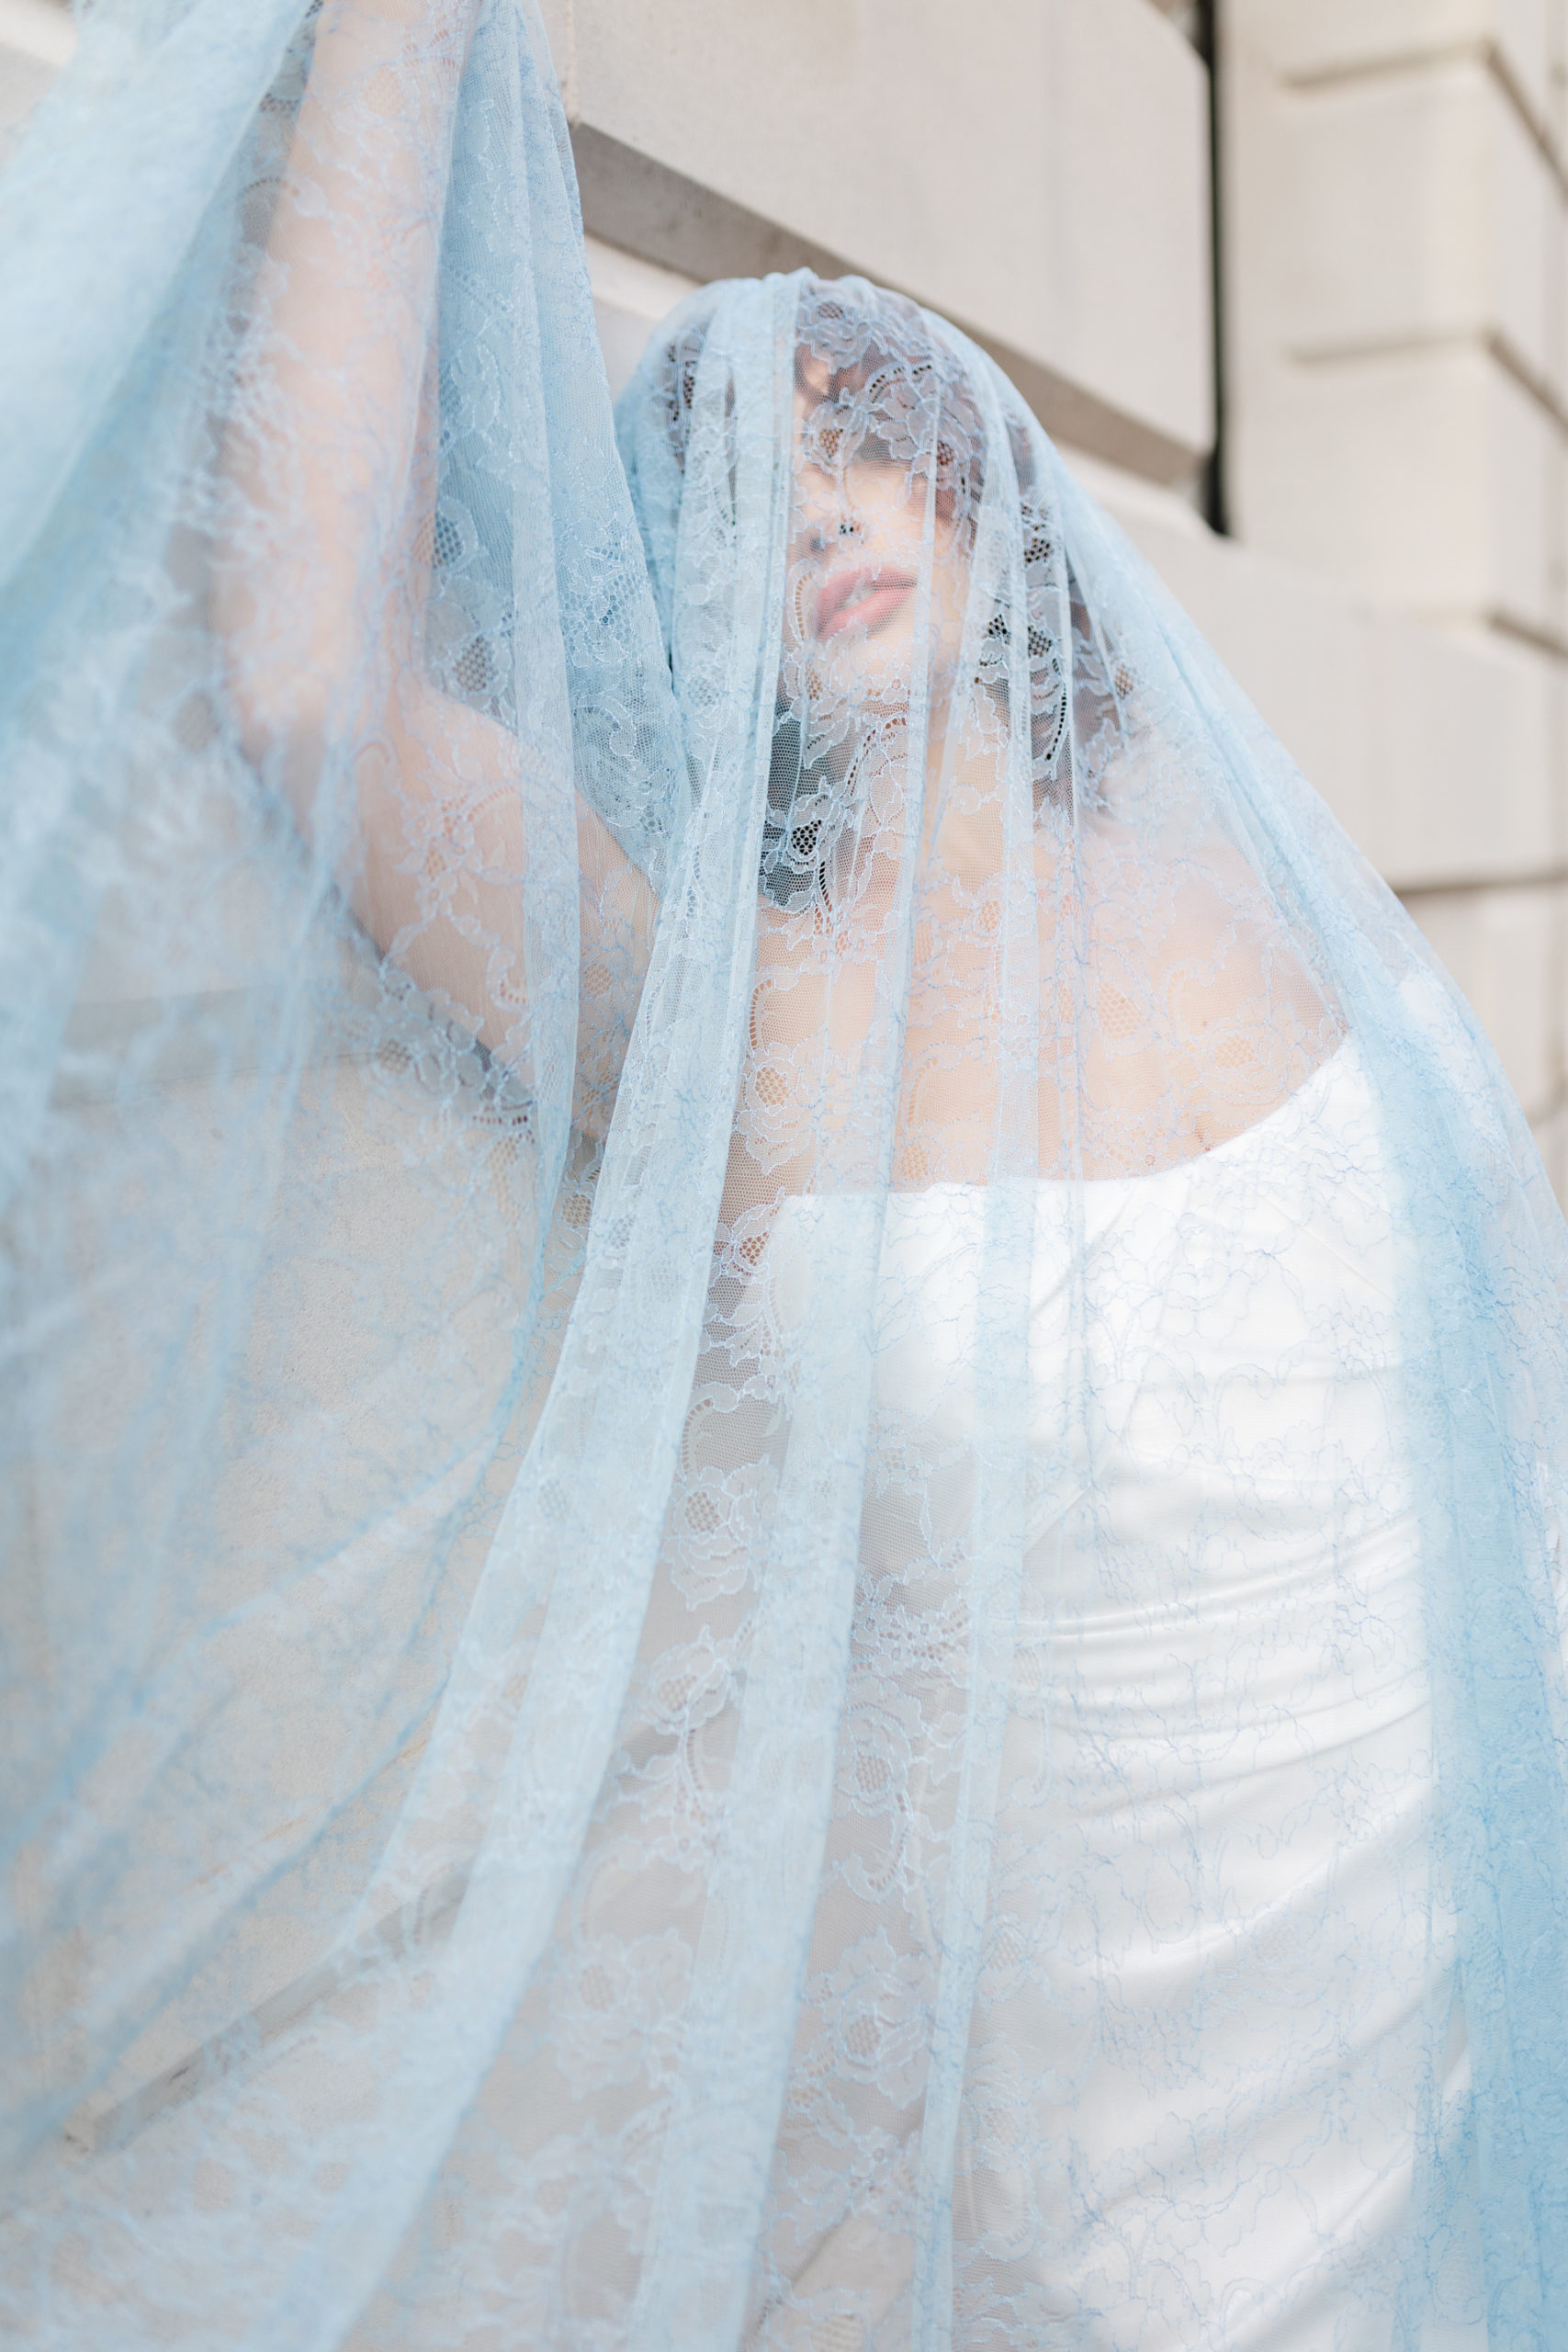 Woman in wedding dress and blue veil